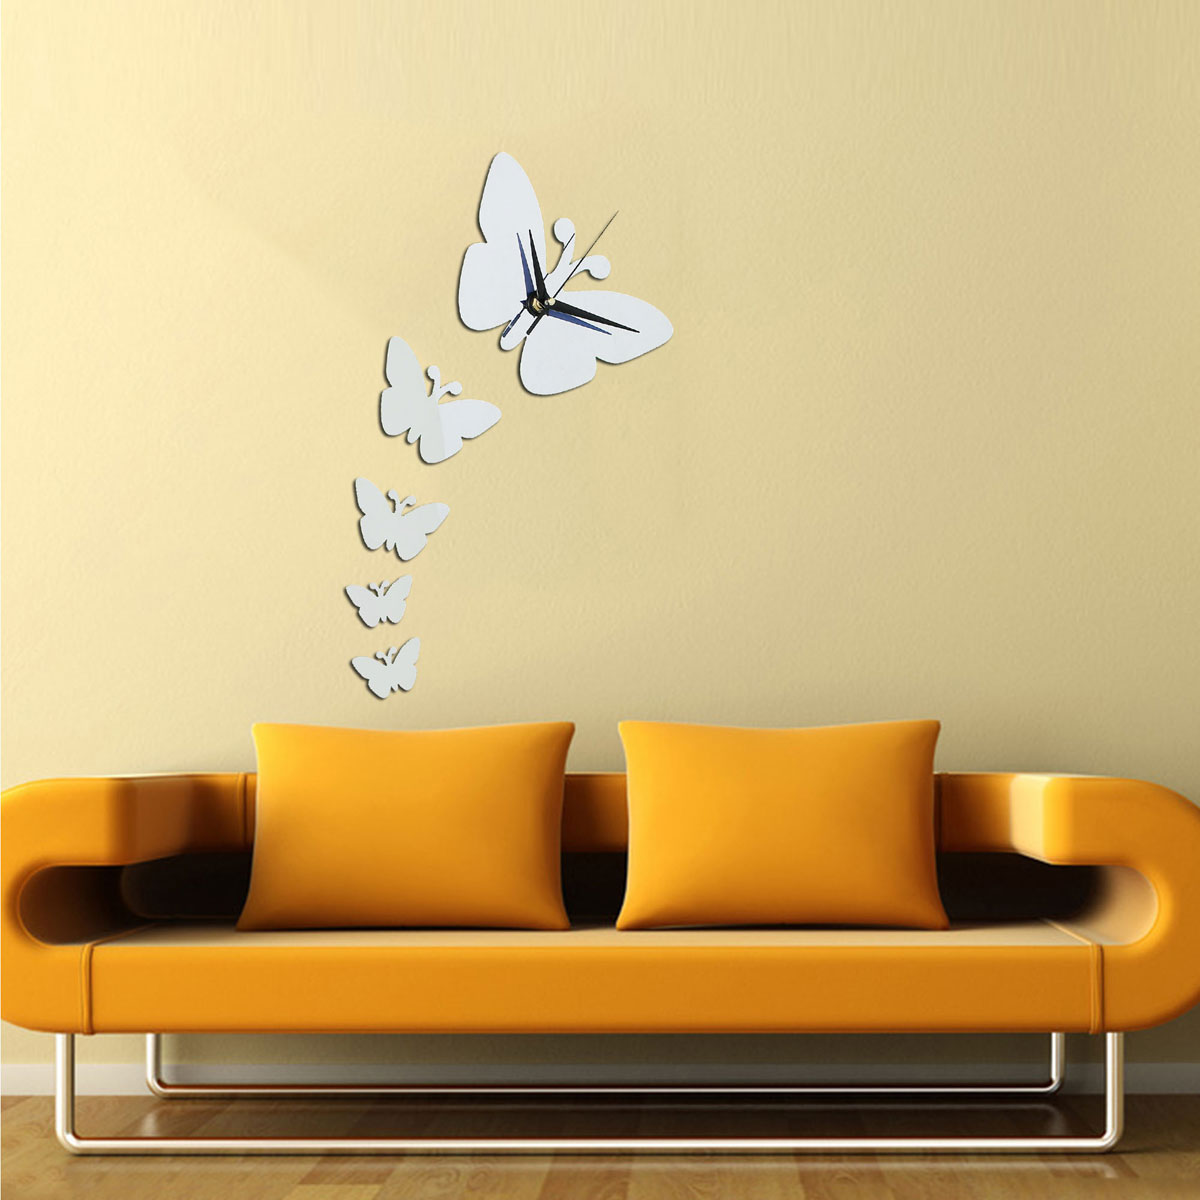 Butterfly-Wall-Clock-Sticker-Specular-Surface-Wall-Sticker-Home-Decoration-1082153-10